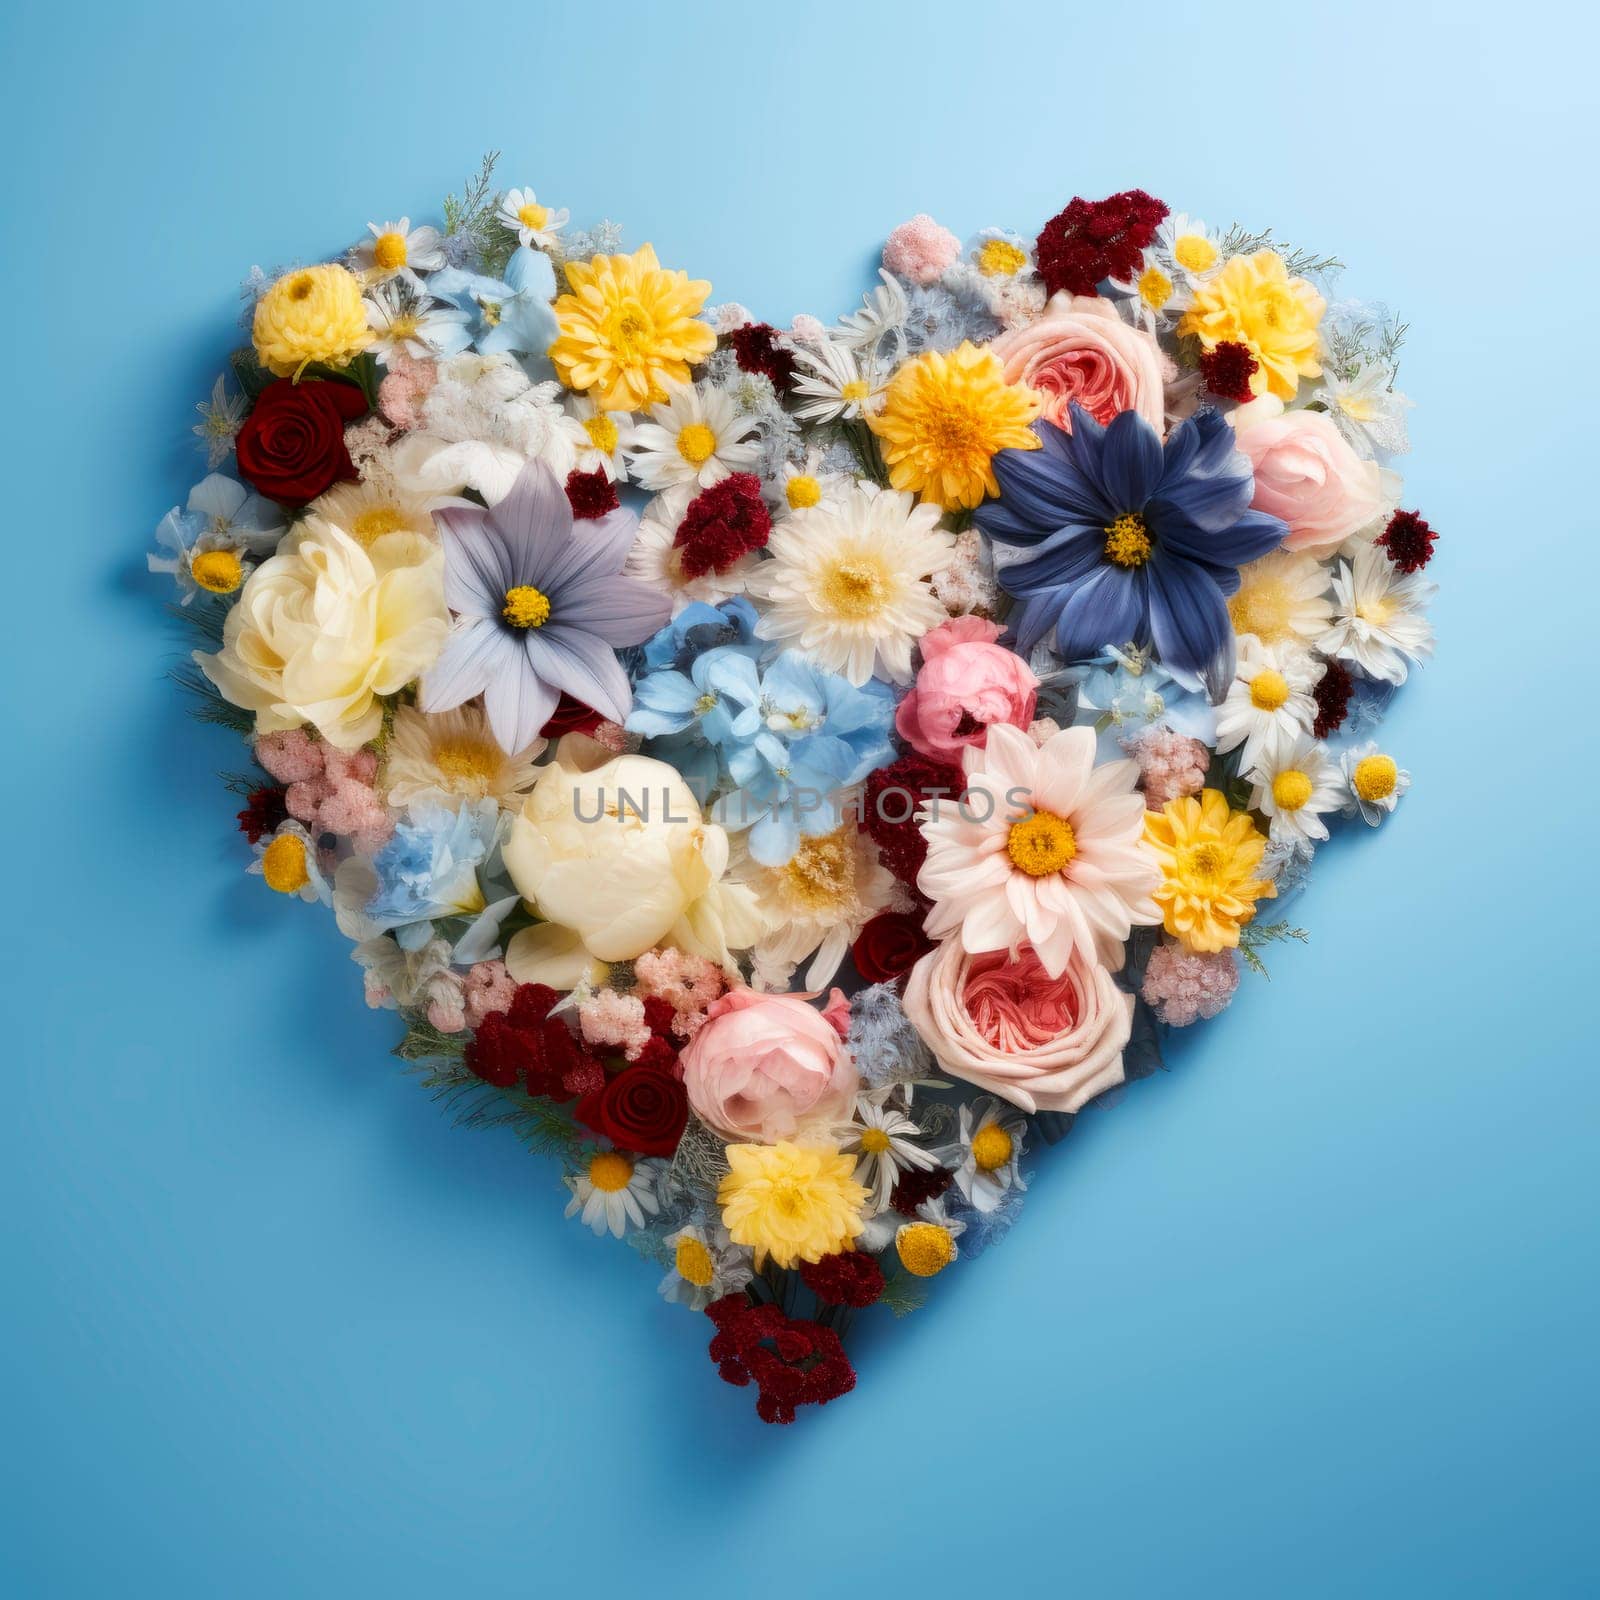 The heart is lined with beautiful multicolored flowers on a blue background by Spirina